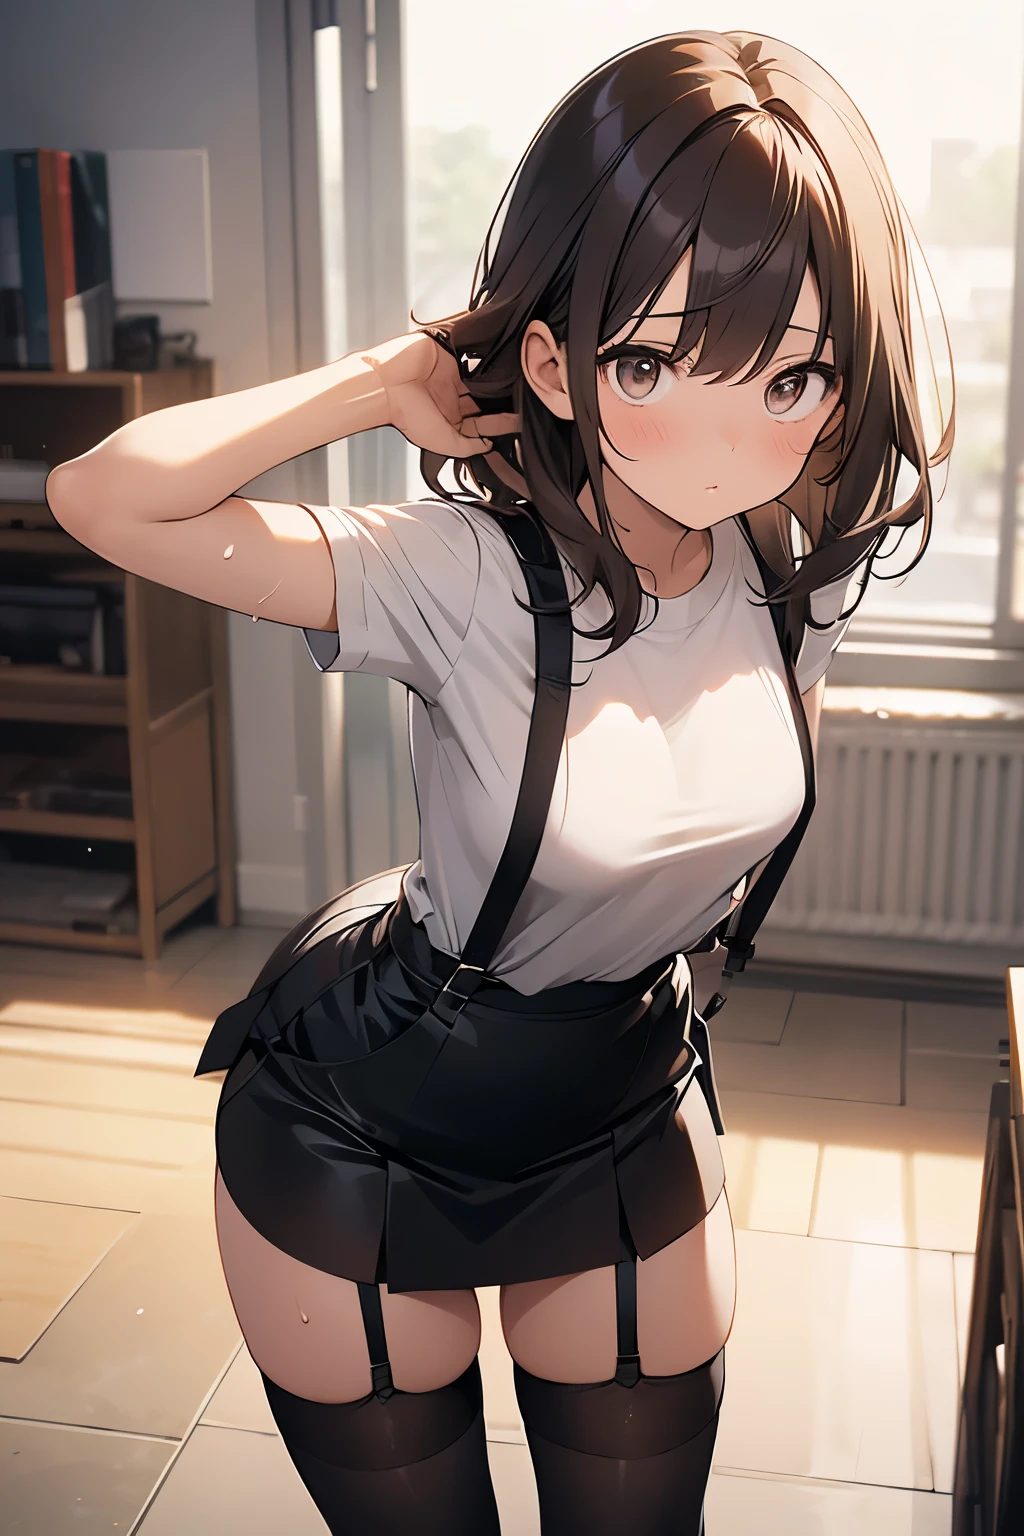 brown hair、looking at the viewer　　suspenders　　　Bulging big breasts　　 　 　　　　Black miniskirt　garter belt　knee high socks　　　　　　Gaze　　　small face　bangs 　　　　　Beauty　　hands up　　 　Gaze 　black boots 　provocation　　armpit sweat　one person 　　put your hands behind your back　cutter shirt　　Panty shot